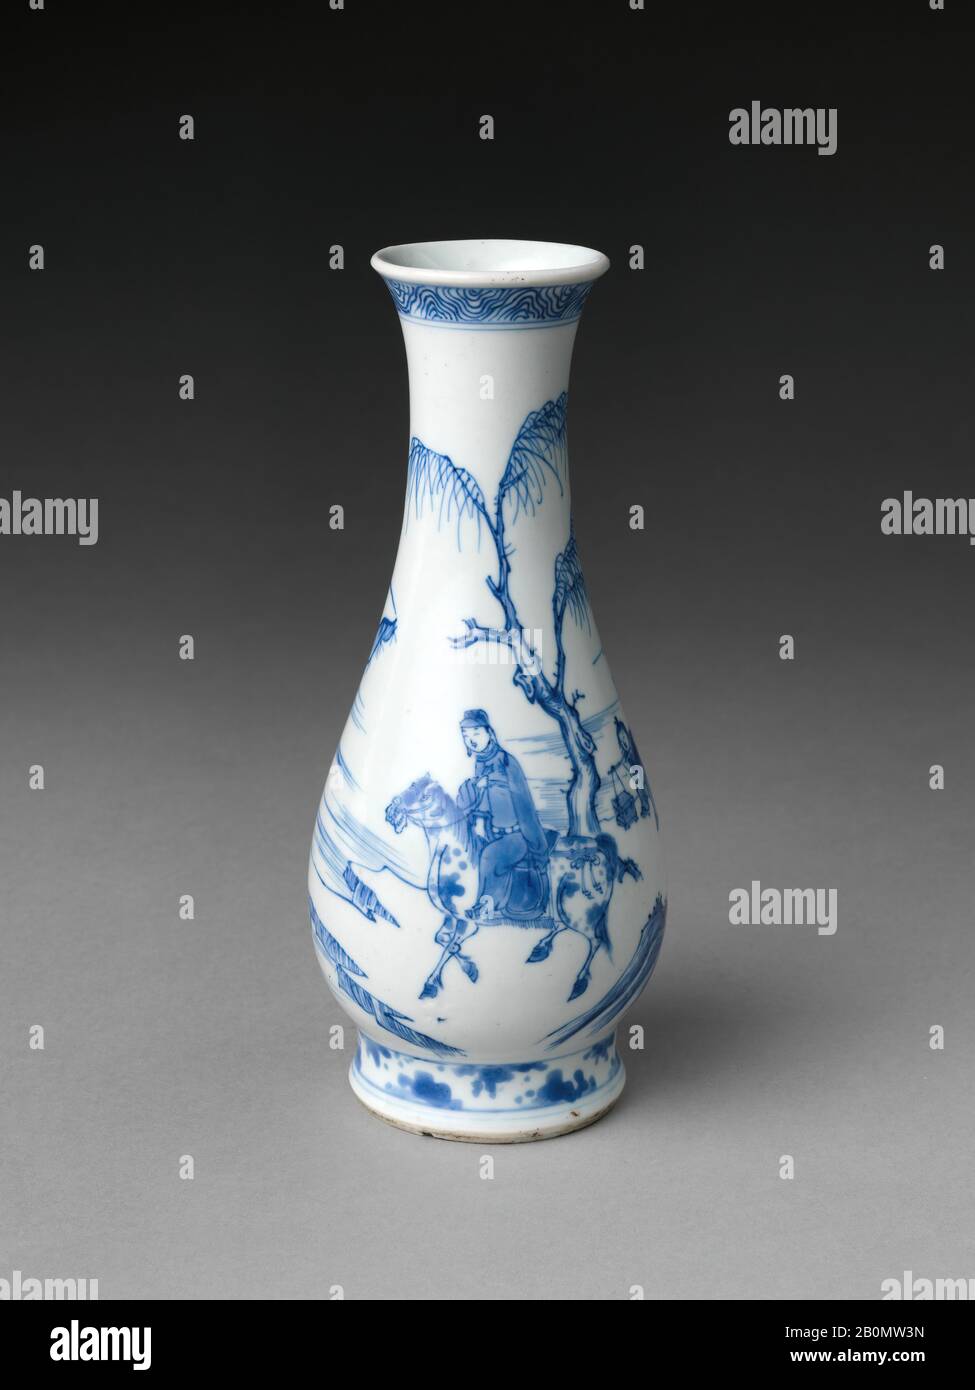 Vase with Equestrian Figure in Landscape, China, Qing dynasty (1644–1911), Shunzhi (1644–61) period, Date mid-17th century, China, Porcelain painted with cobalt blue under transparent glaze (Jingdezhen ware), H. 8 in. (20.3 cm); Diam. 3 3/8 (8.6 cm), Ceramics Stock Photo